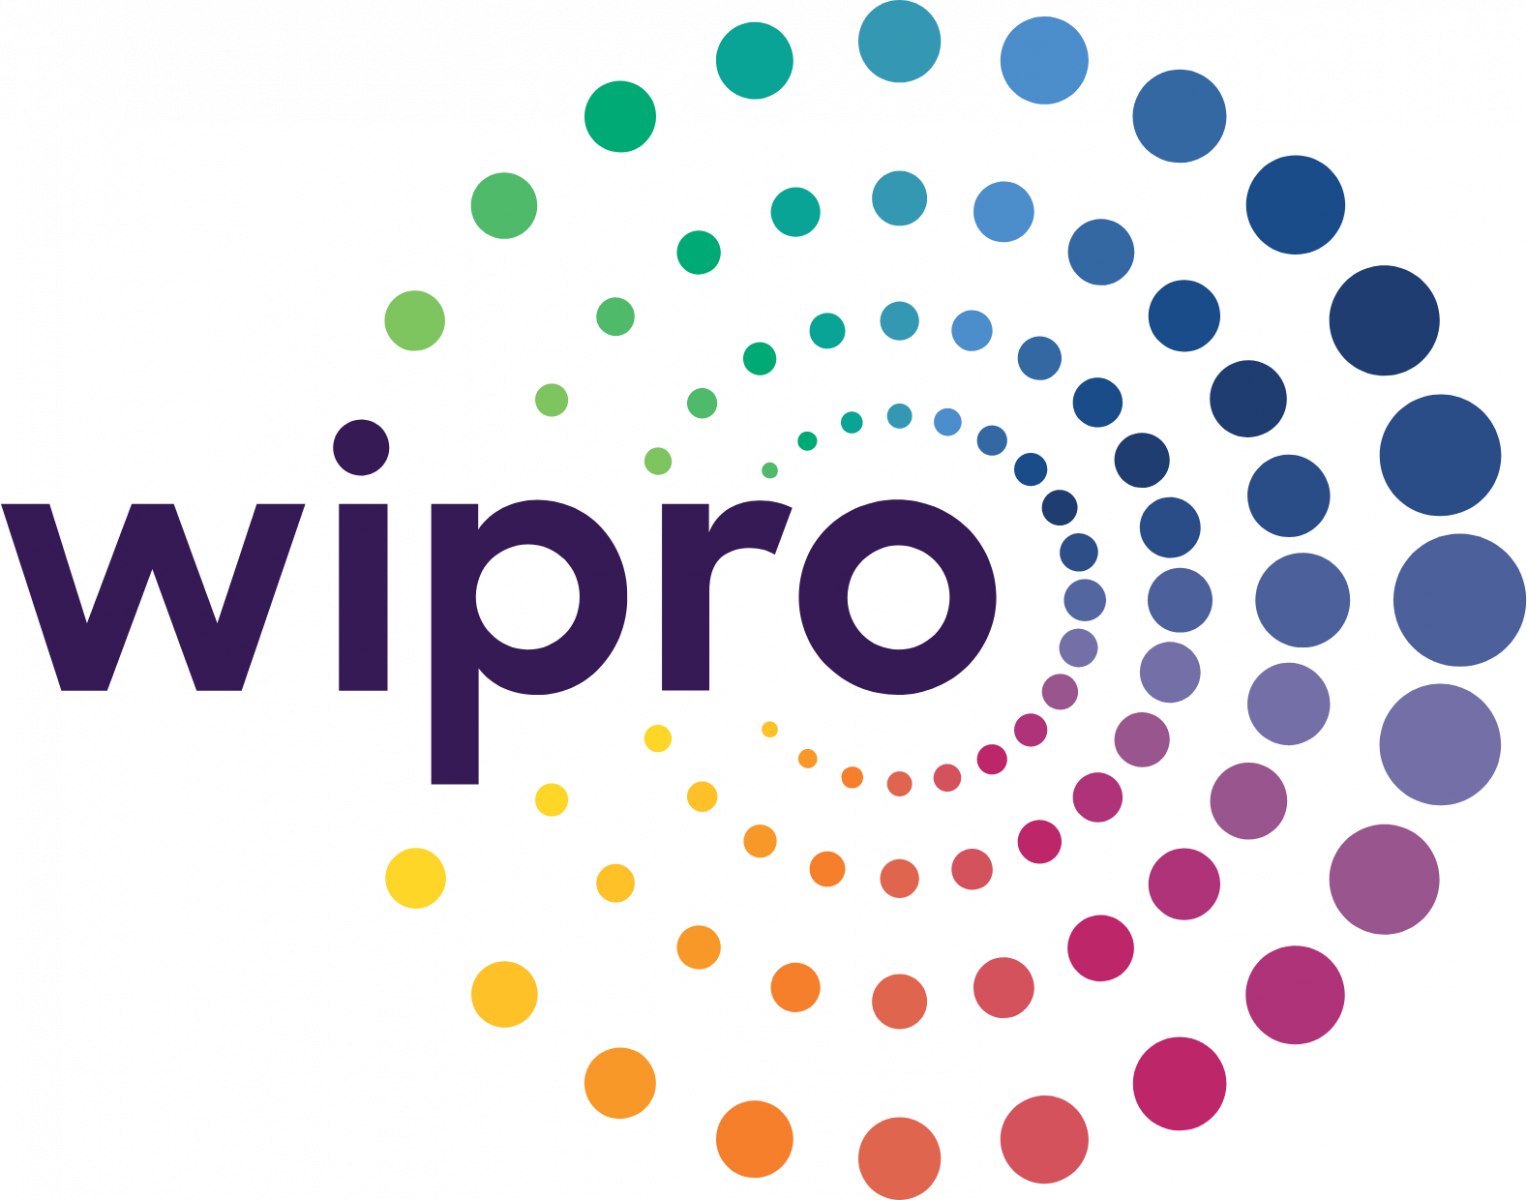 Wipro it companies in ECIL